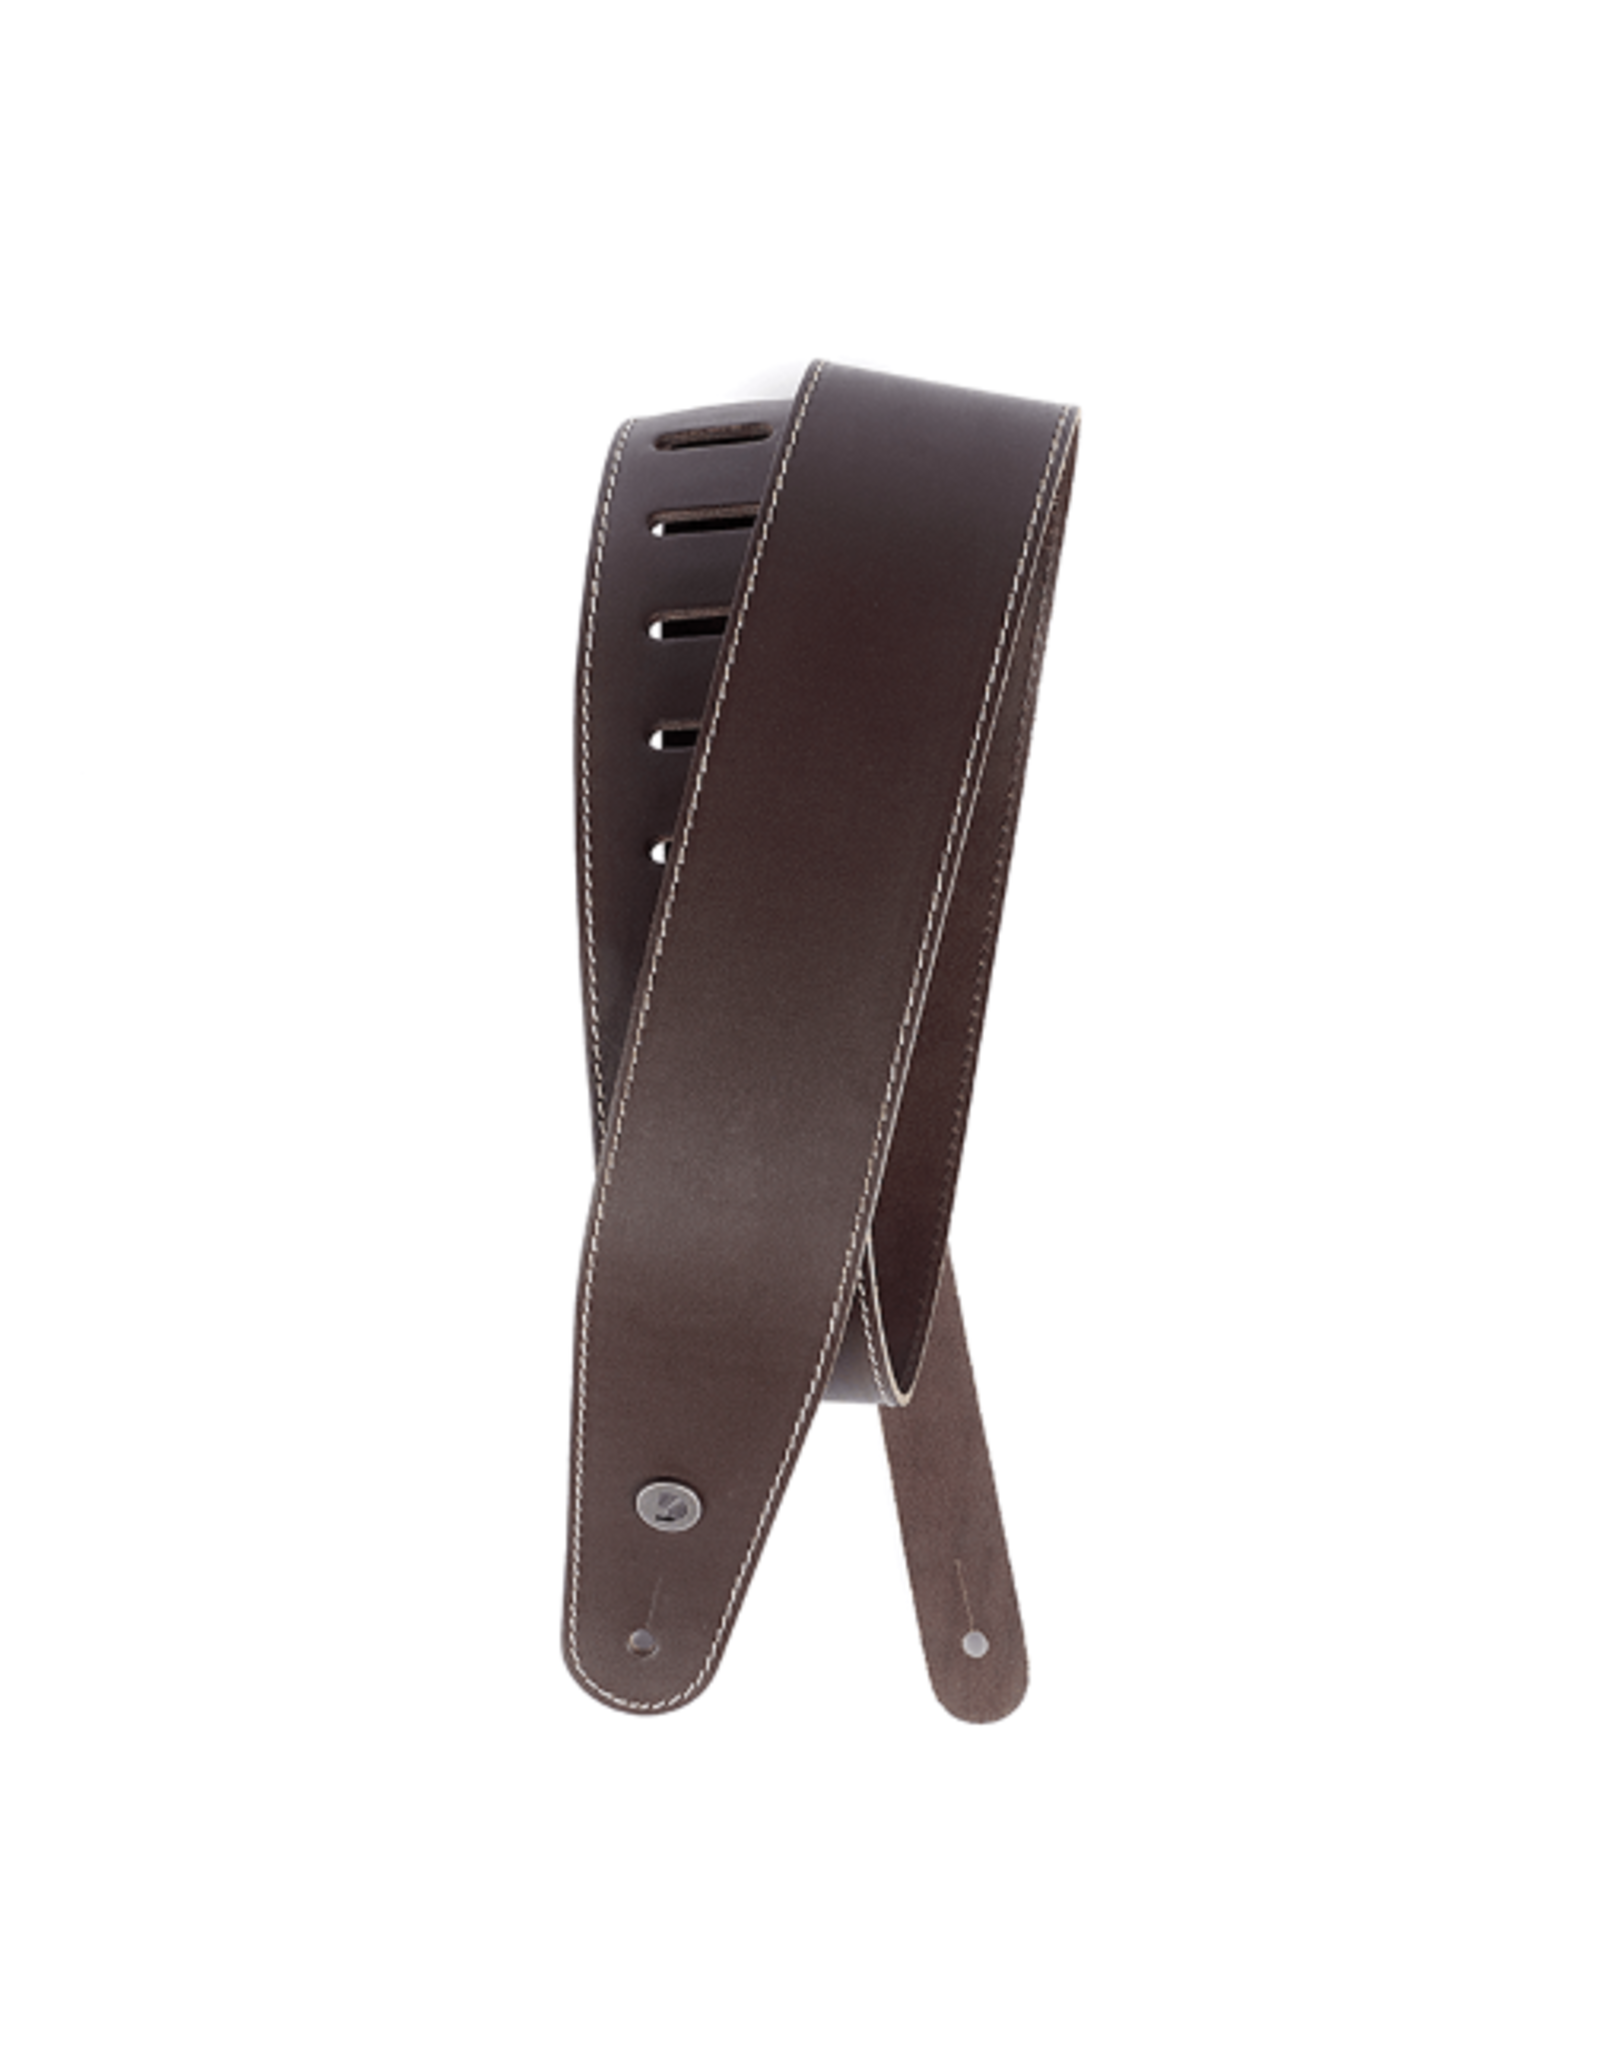 D'Addario D'addario Classic Leather Guitar Strap with Contrast Stitch, Brown